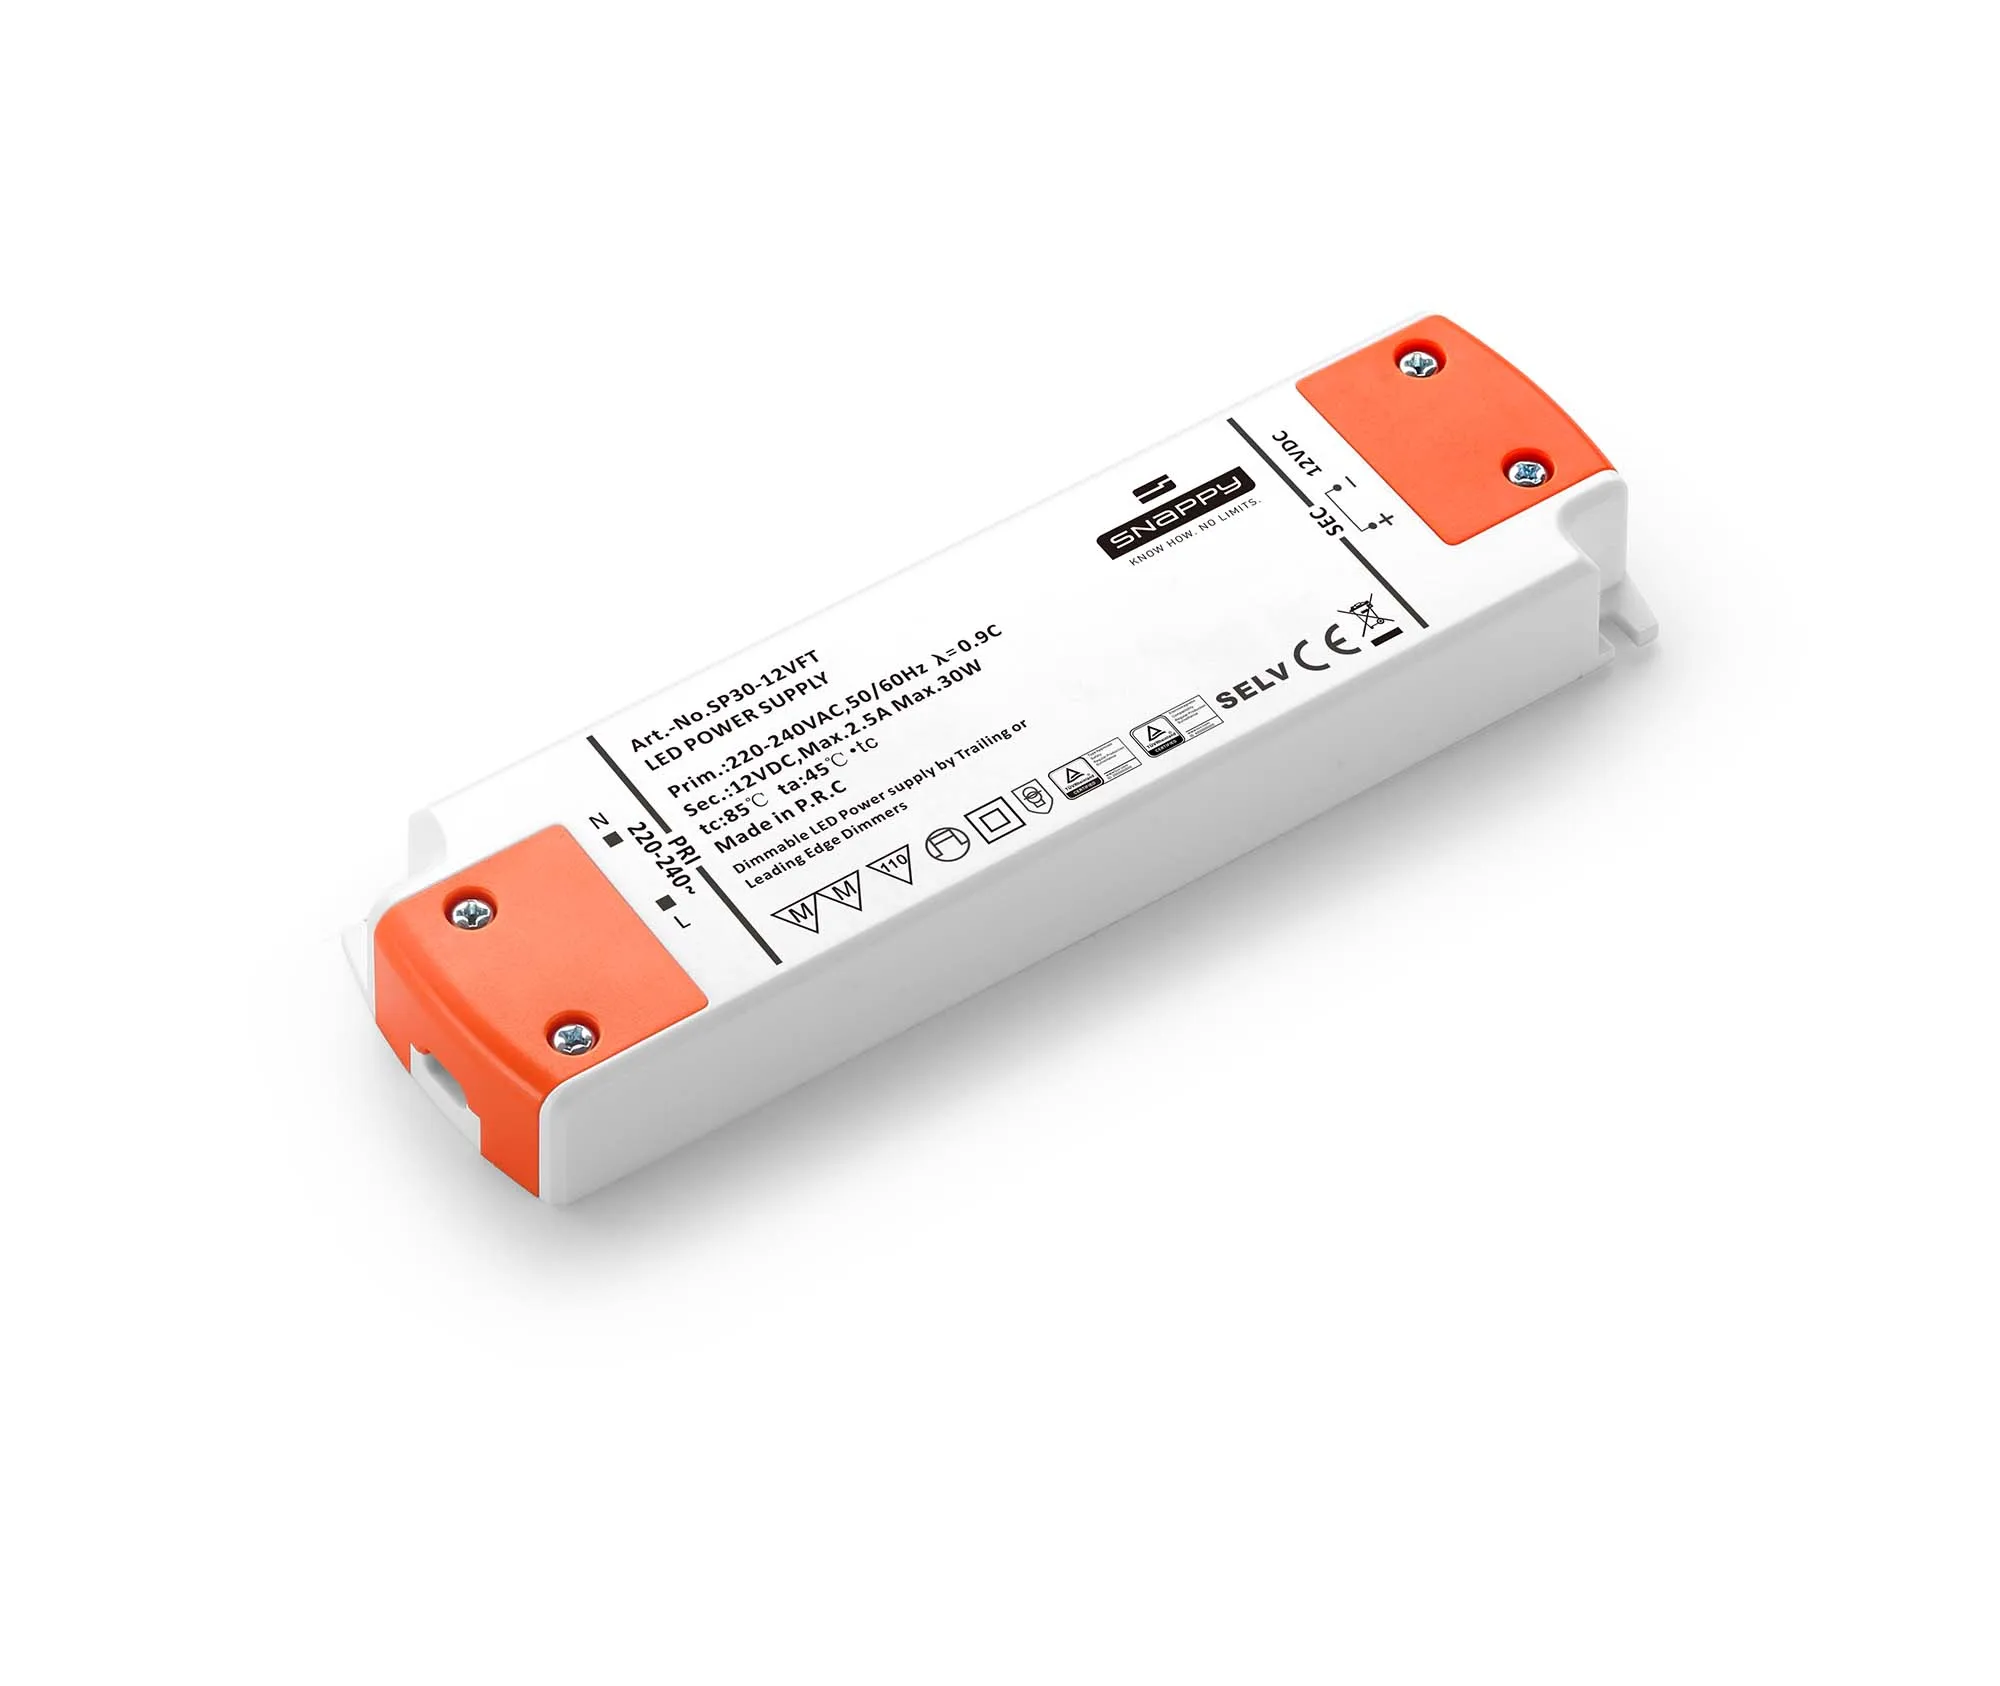 SP30-24VFT RTS Input 200-240VAC 30W 12V/24V IP20 plastic case constant voltage super slim triac dimmable SNAPPY LED Driver